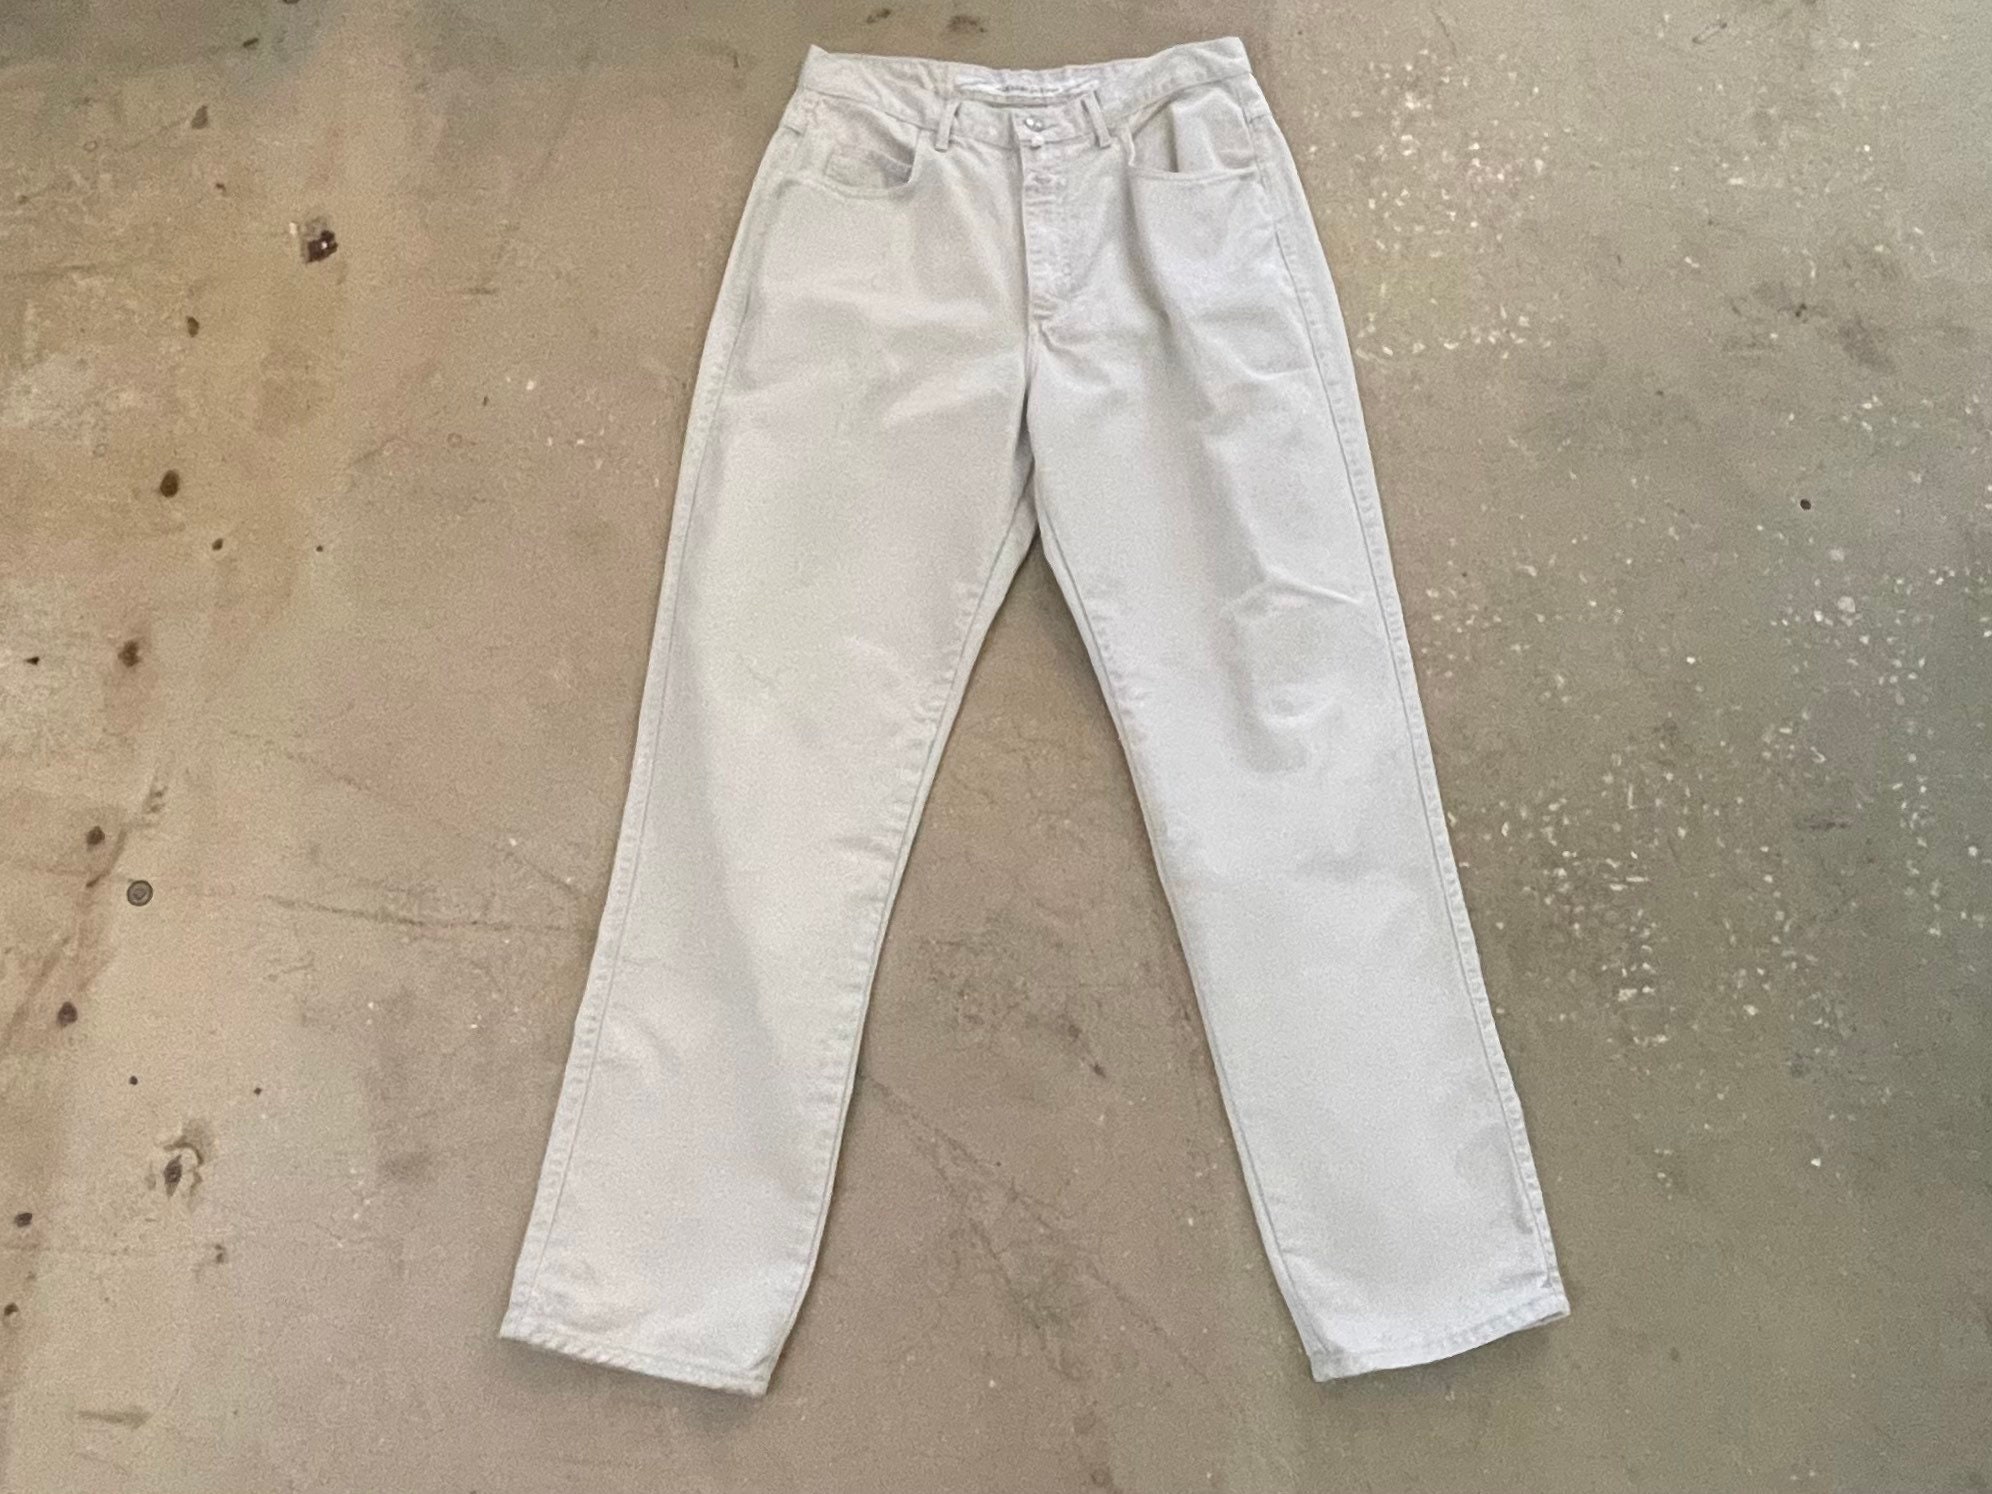 white leather pants / vintage 80s high waist stove pipe cigarette